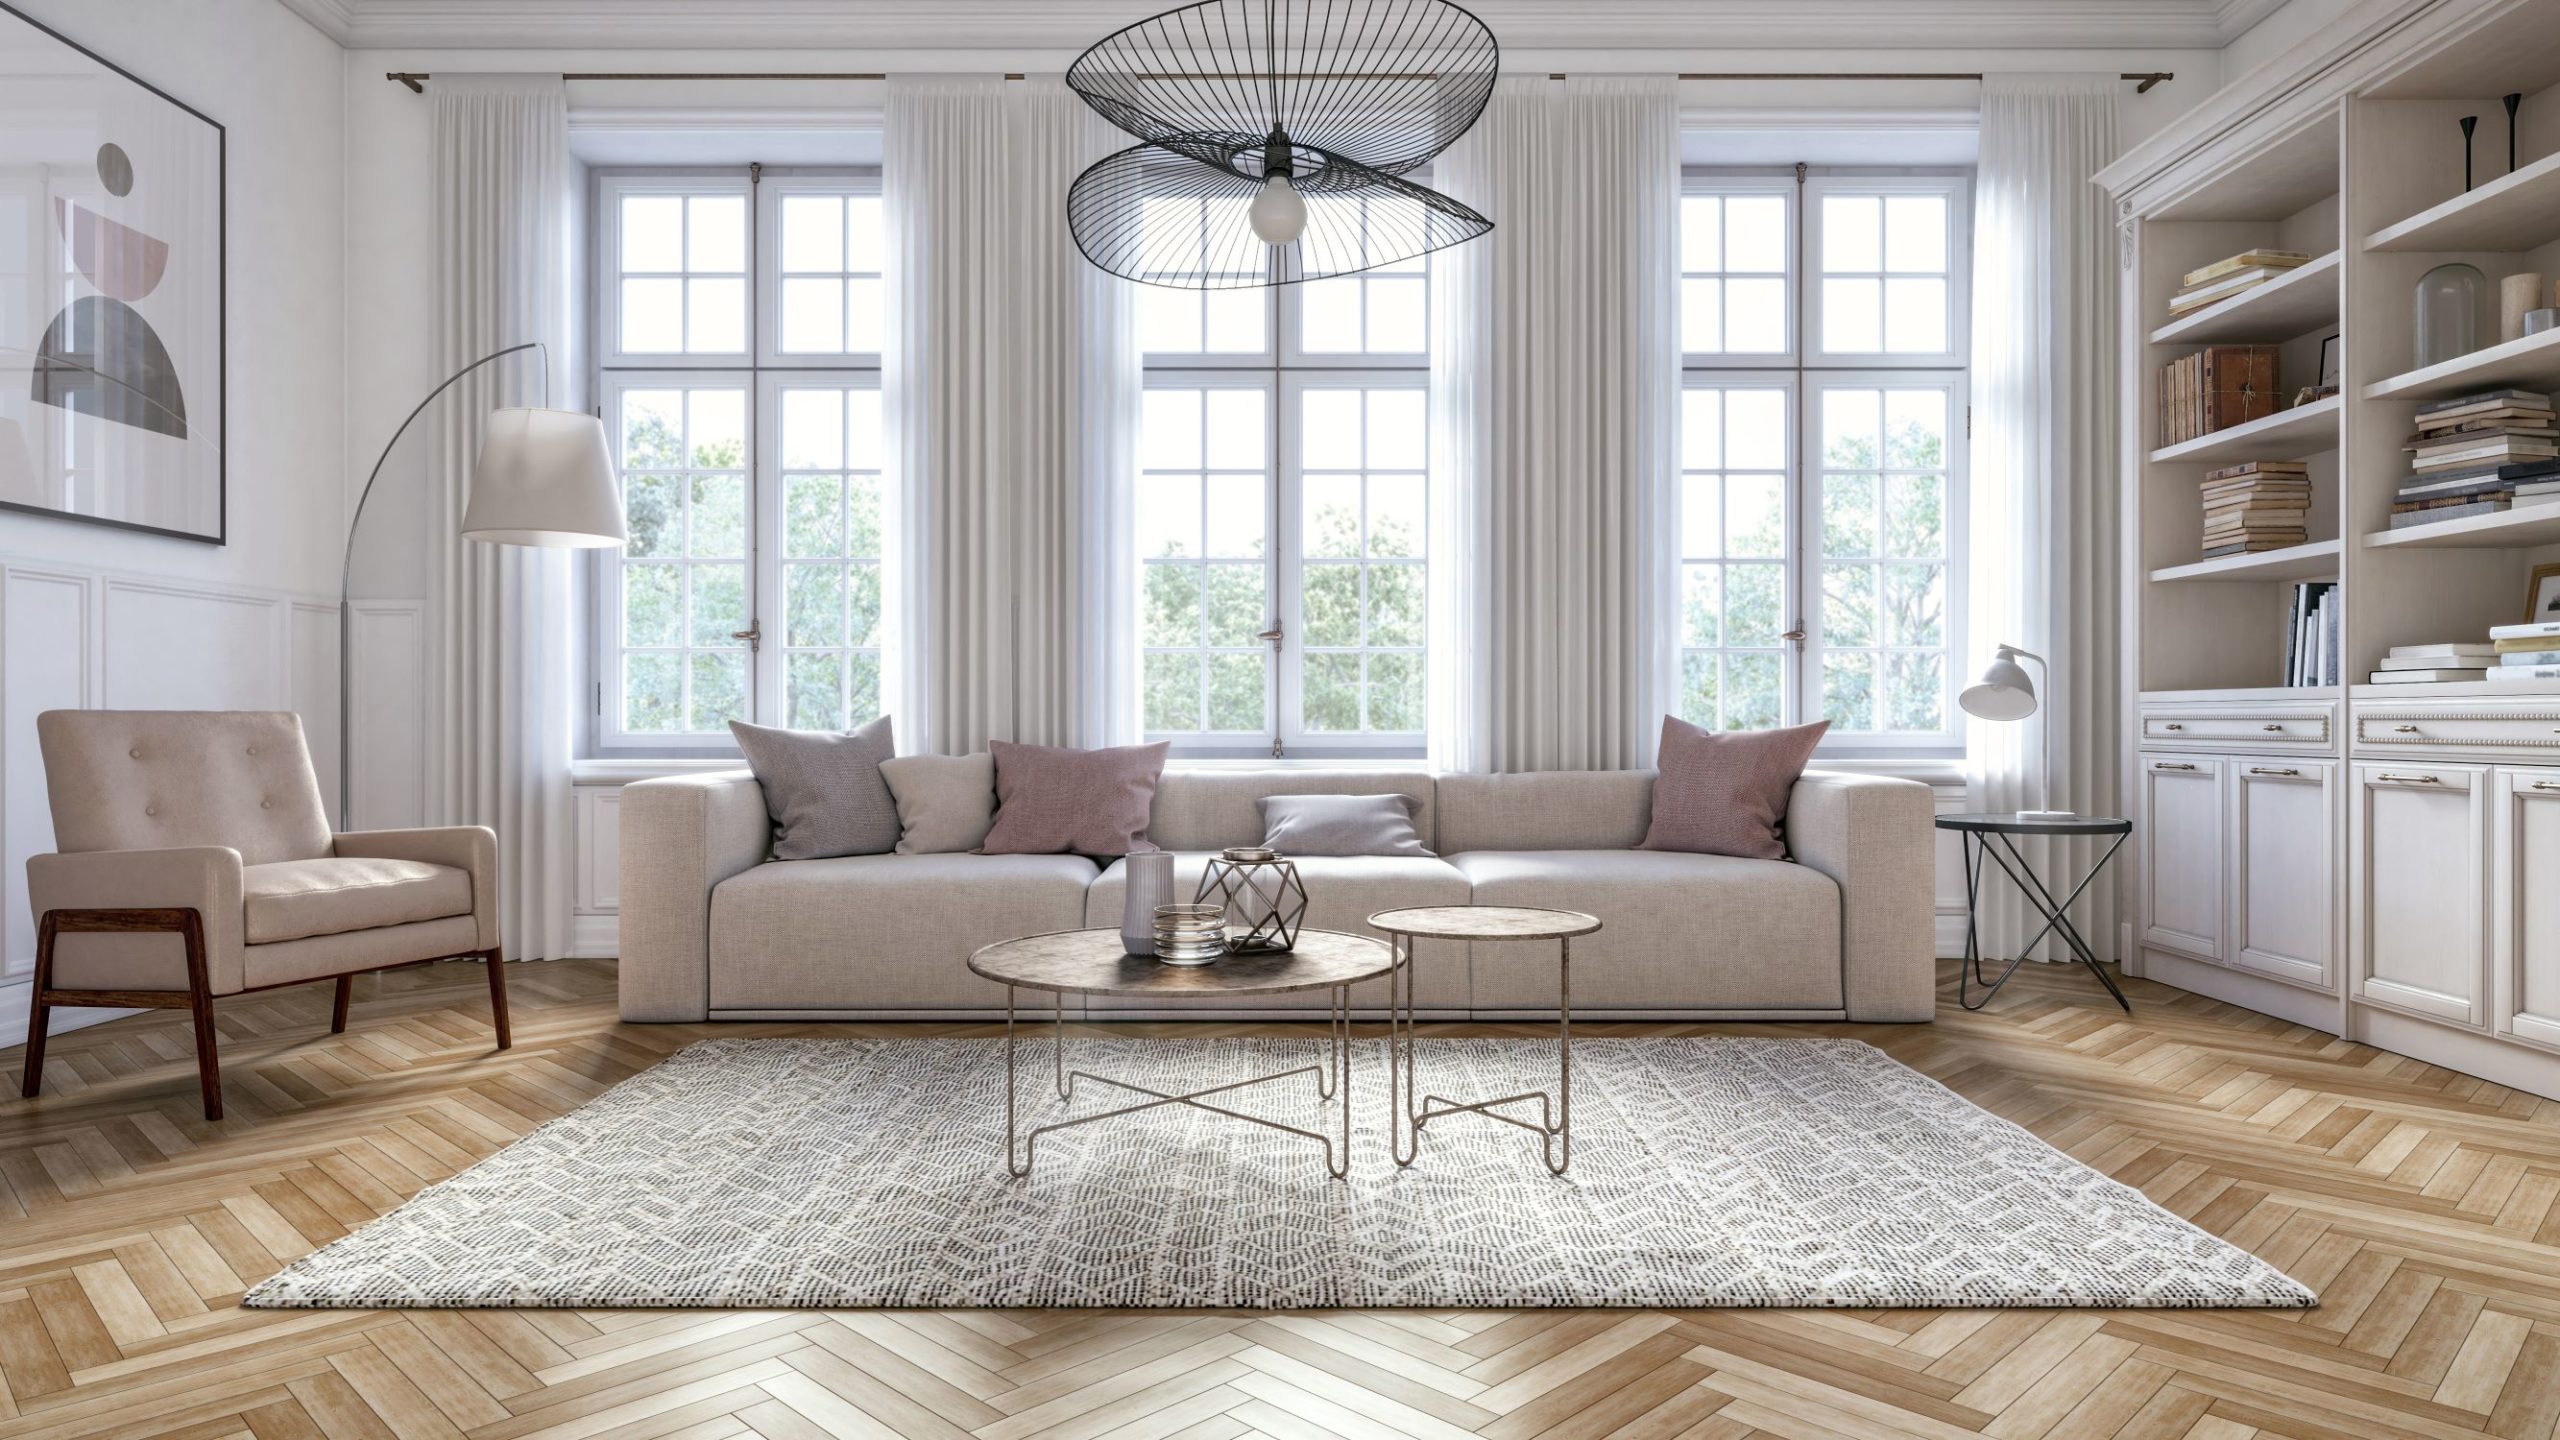 There are some differences between double-pane windows and triple-pane windows by Andersen. This is an image of a living room with beautiful windows.